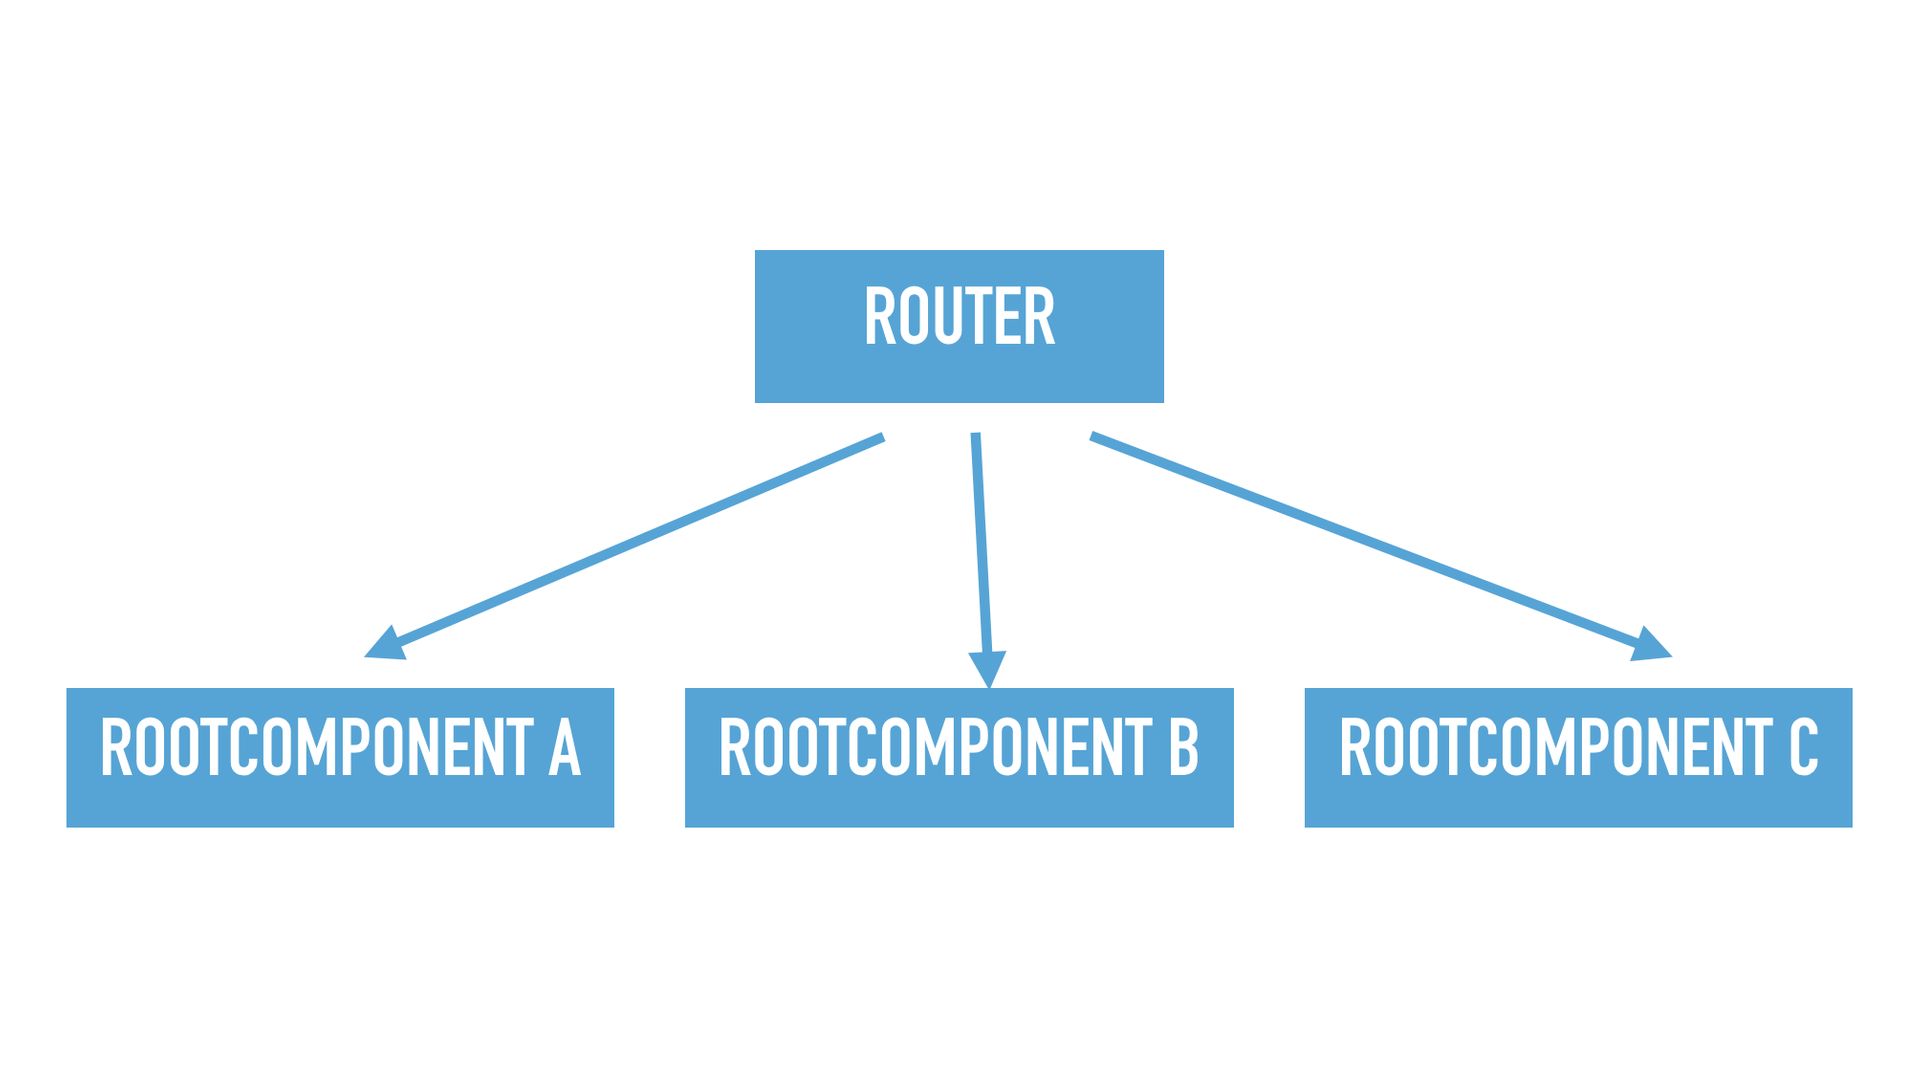 Slide text: Example dependency tree with router and 3 root components.